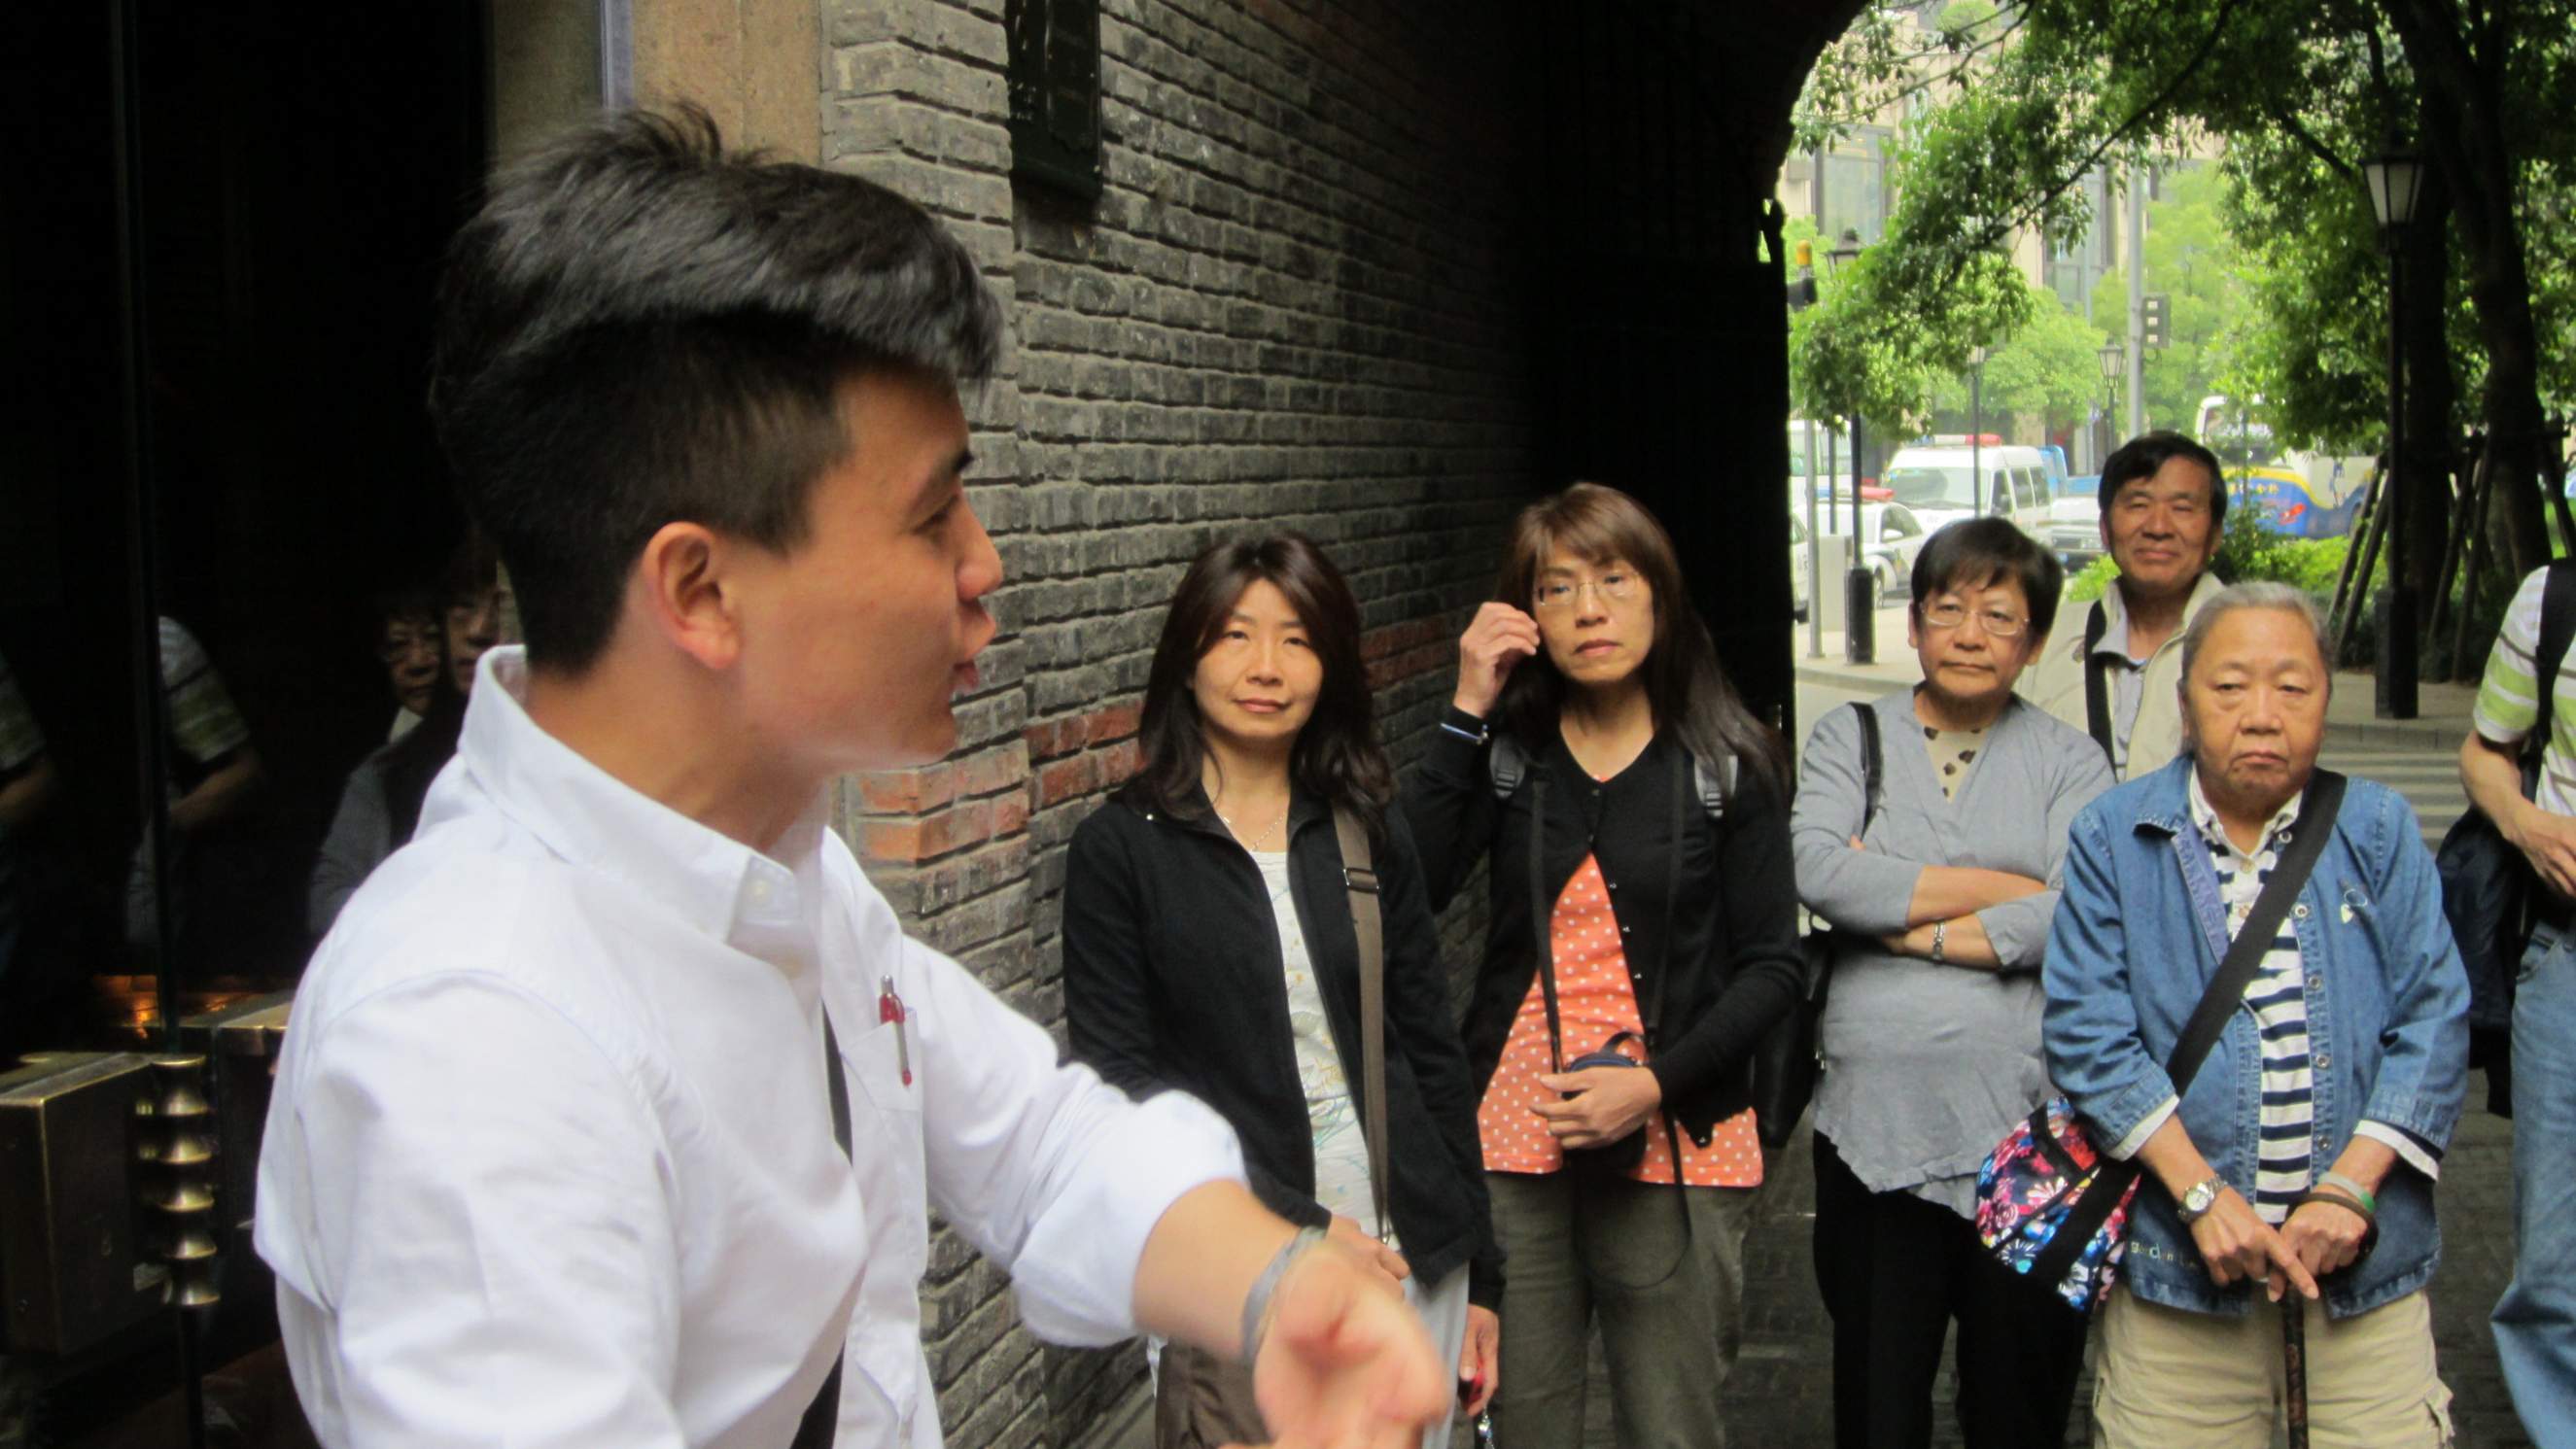 Our tour guide in an area near Nanjing Road in Shanghai.